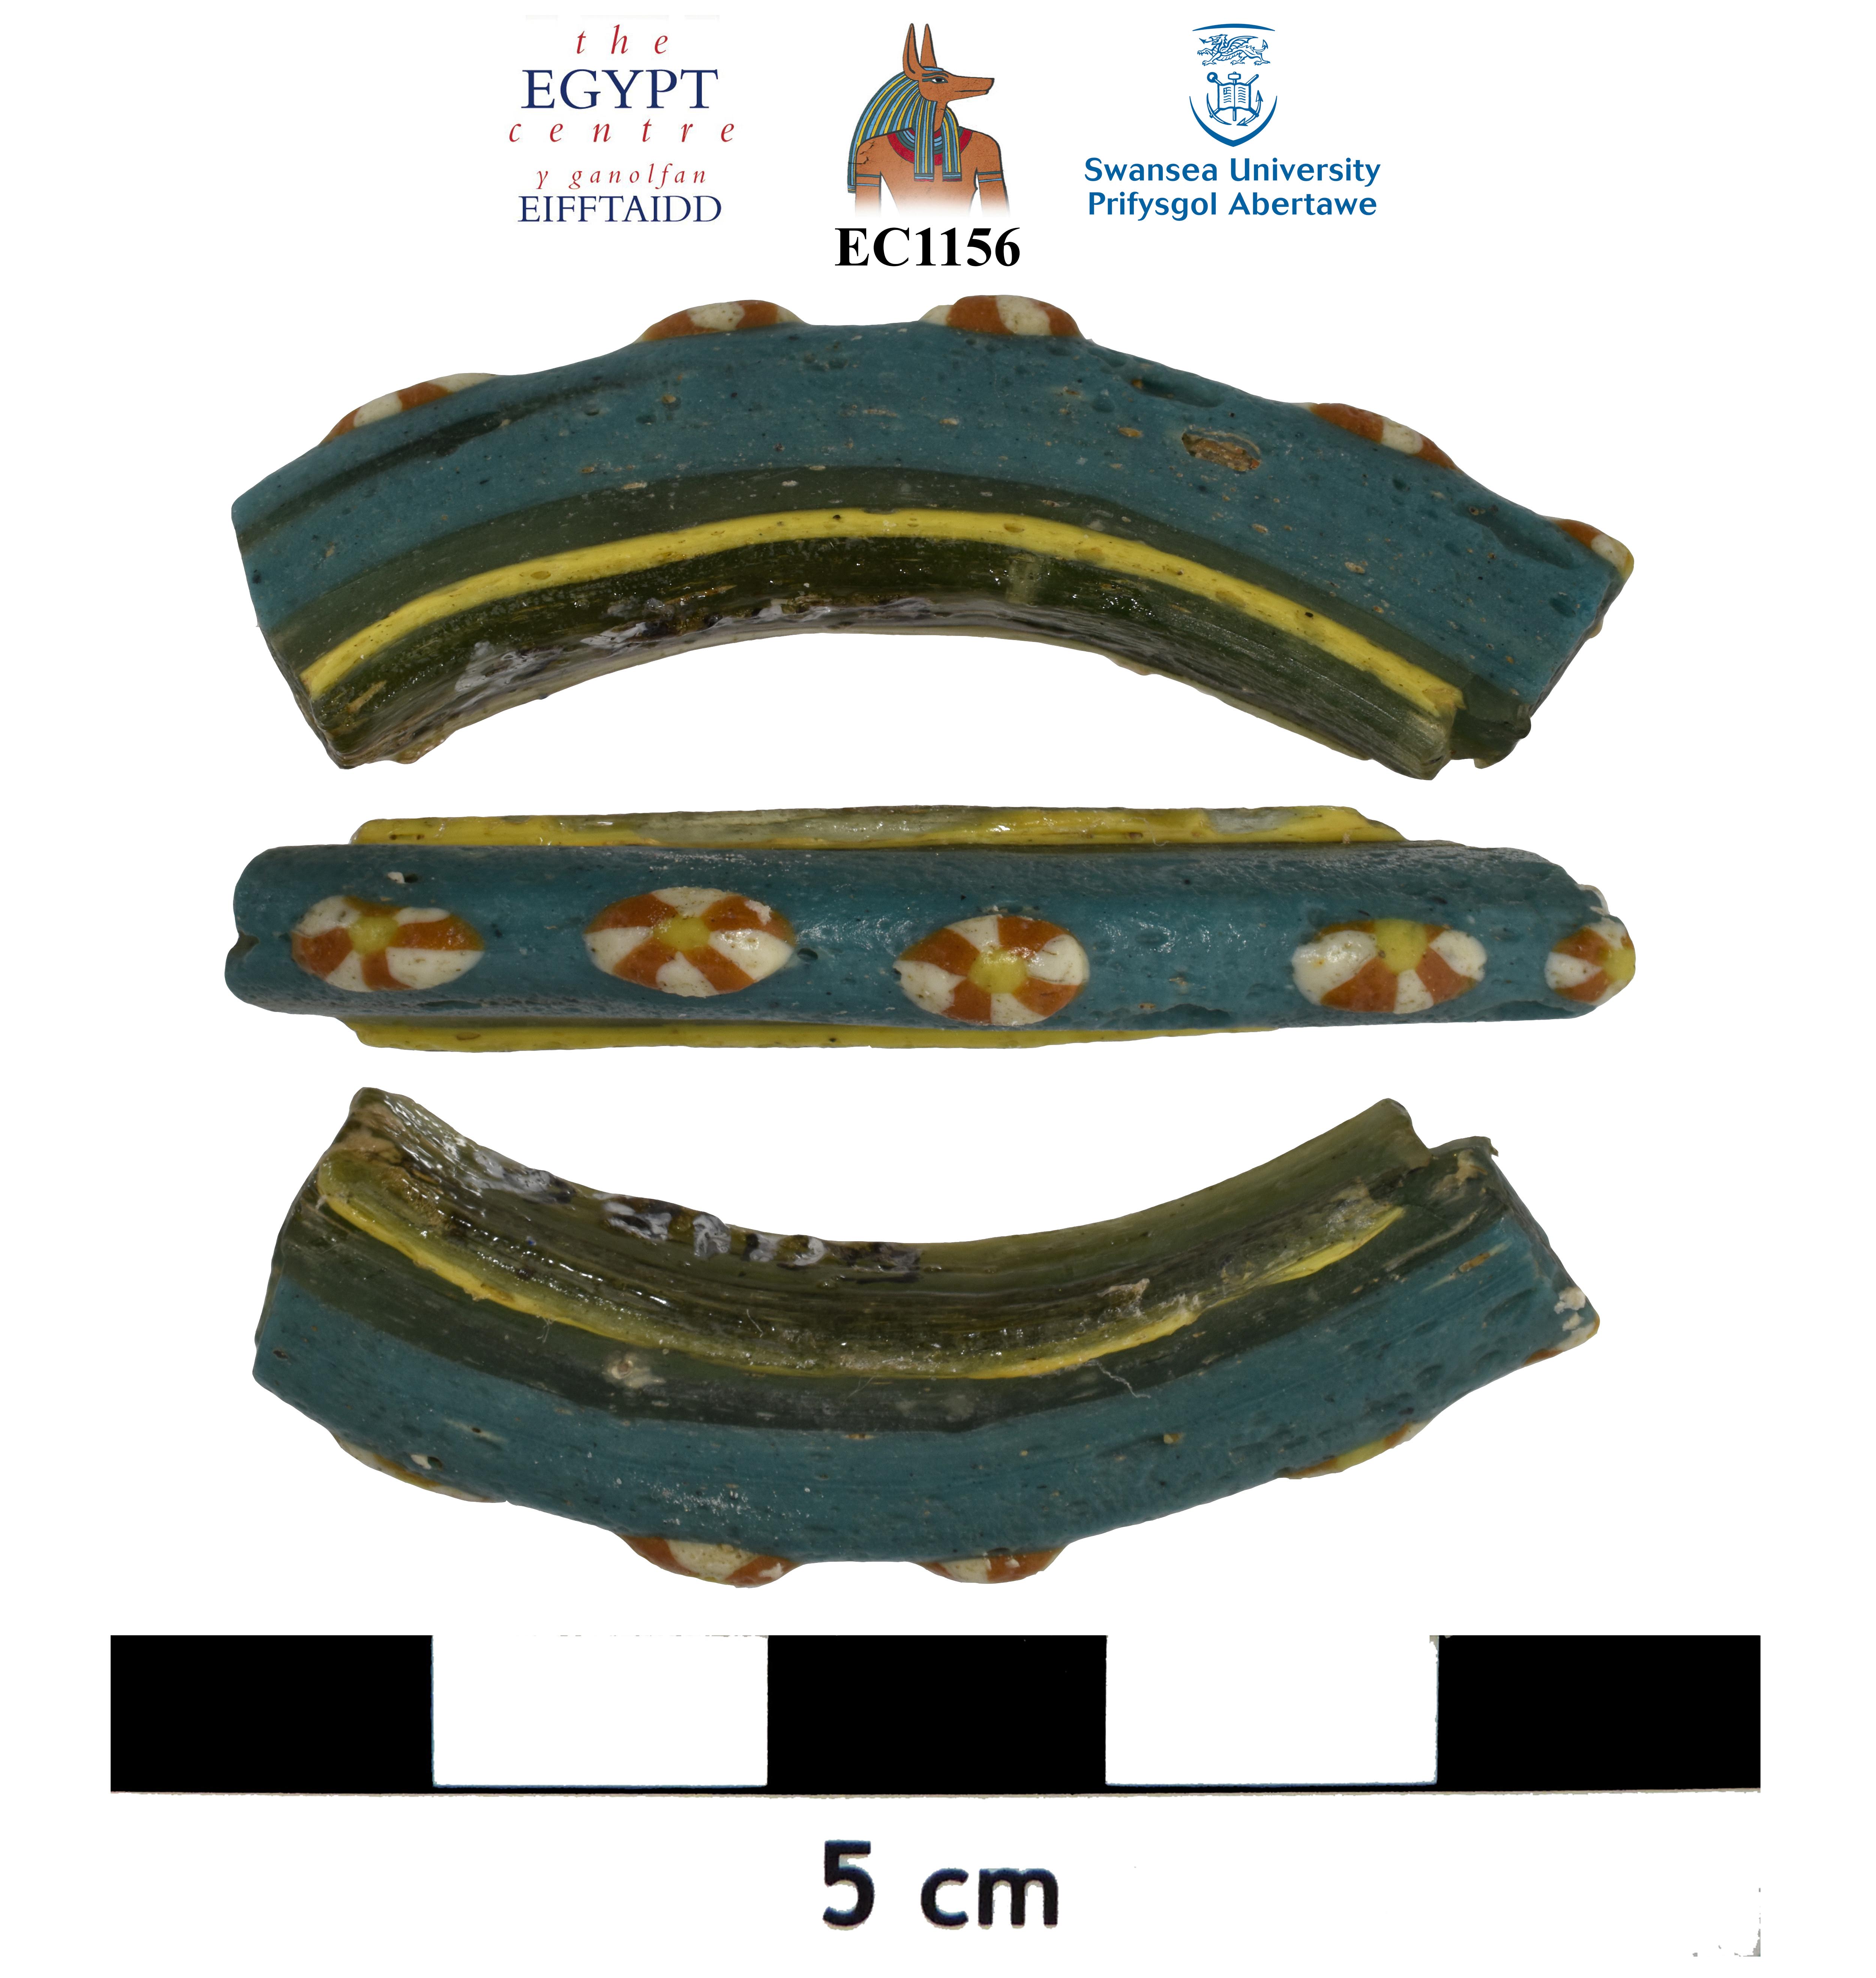 Image for: Fragment of a glass bangle